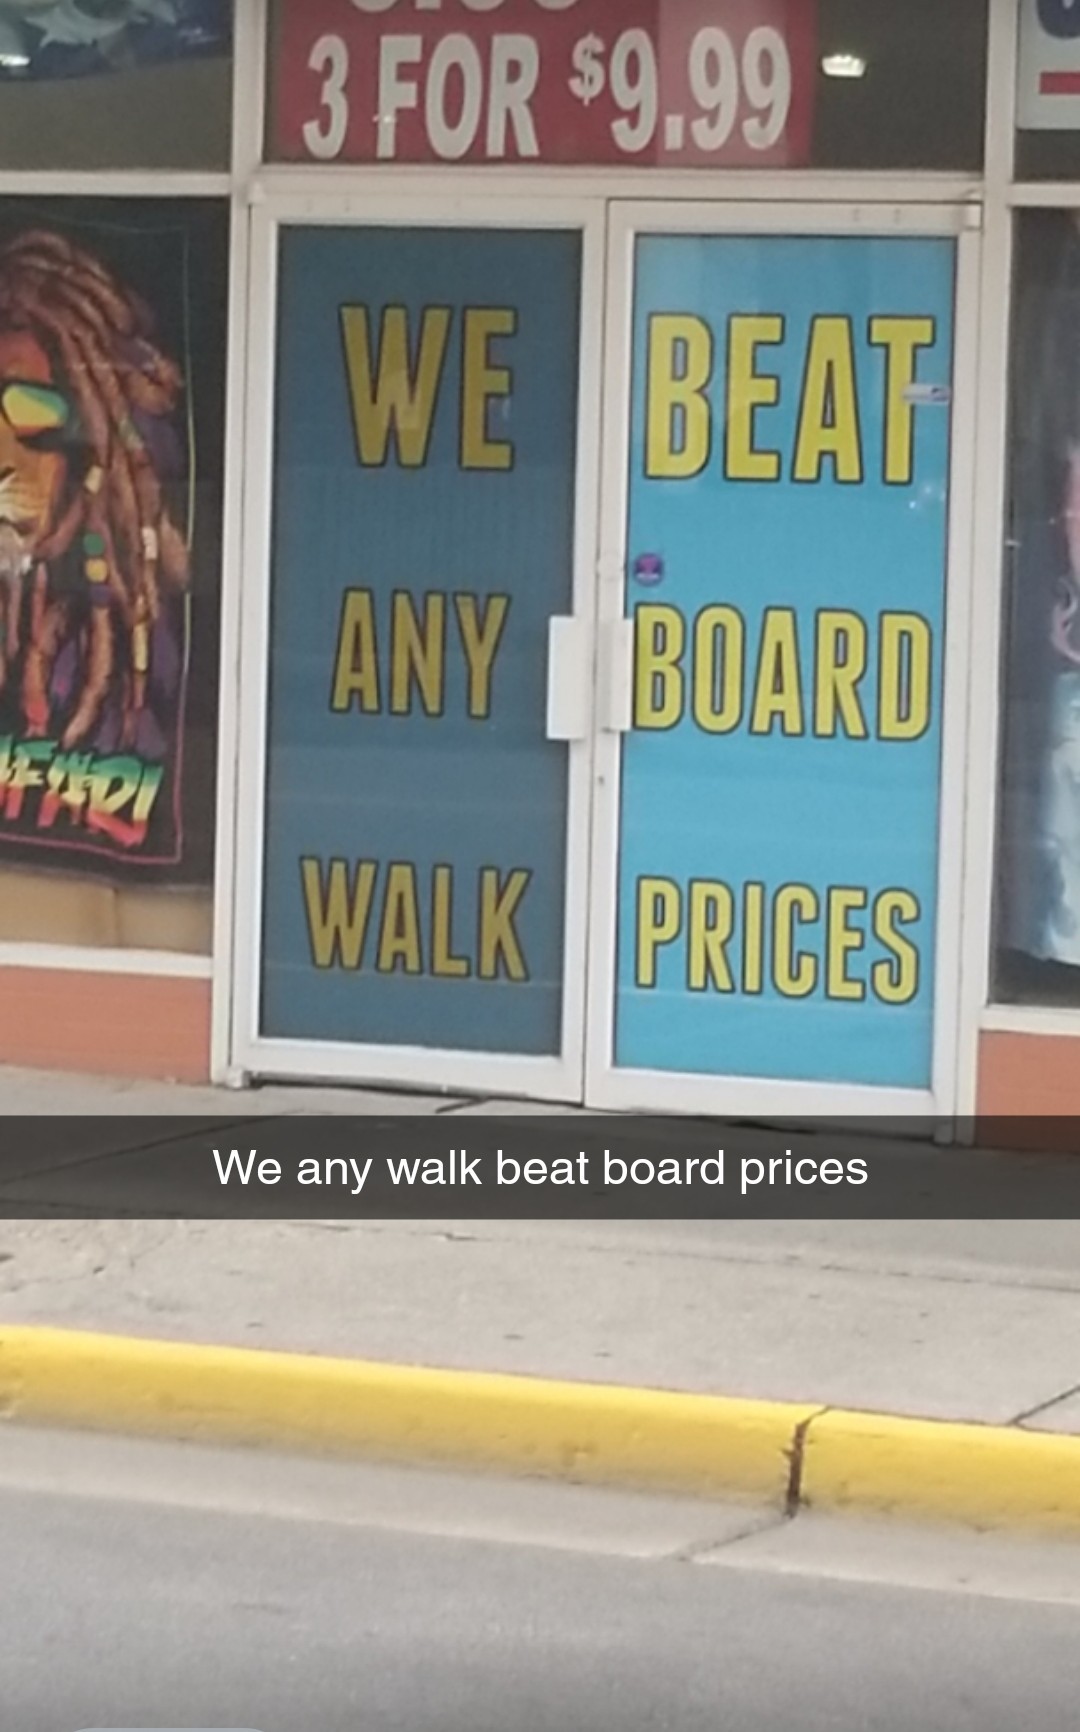 We any walk any board prices - meme